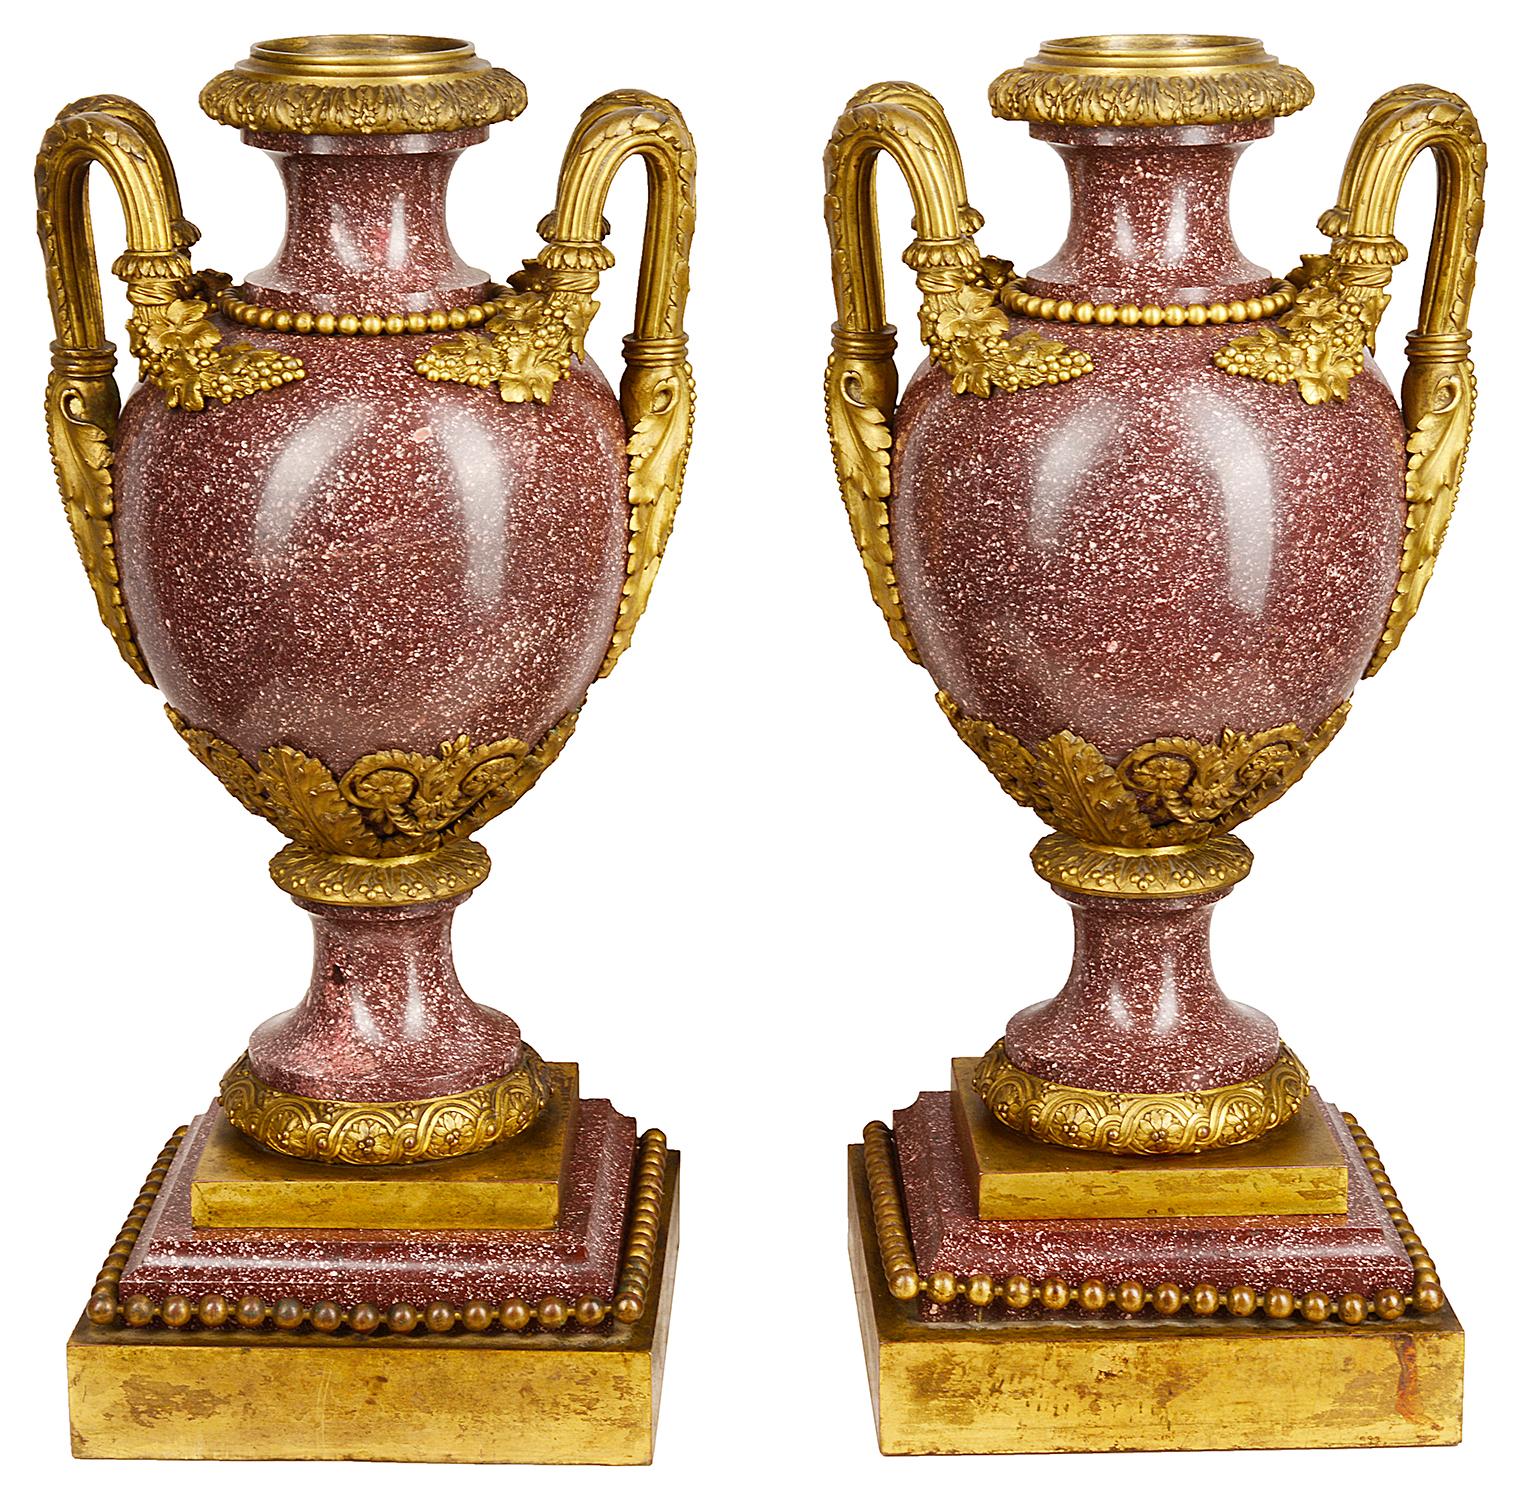 A fine quality pair of neoclassical 19th century French vibrantly coloured Porphery urns, each with wonderful gilded ormolu mounts and handles of scrolling foliate and grapevine decoration, raised on plinth Porphery and ormolu bases. Measures: 56cm